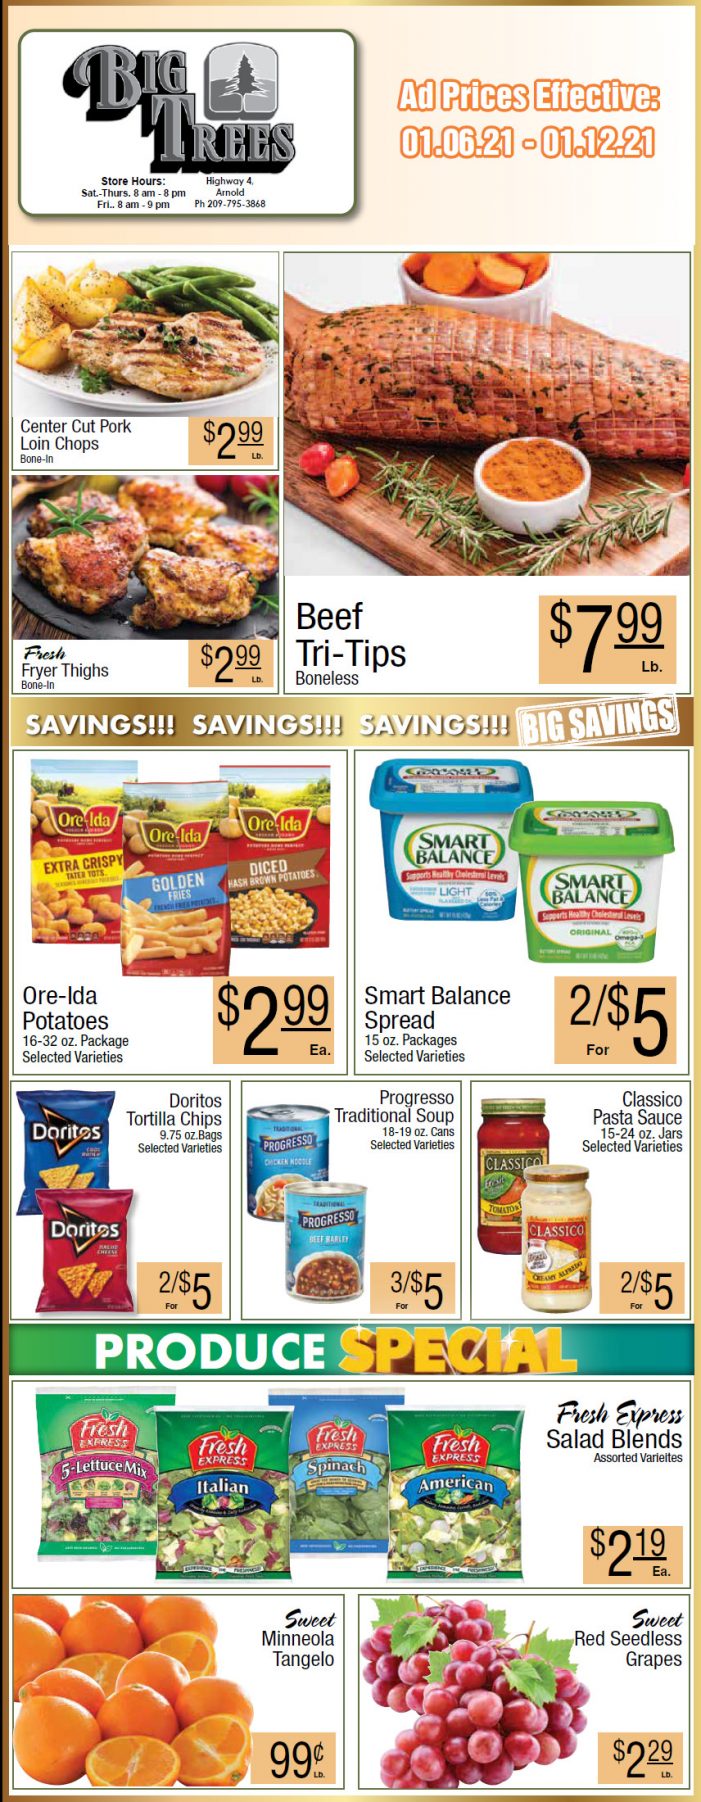 Big Trees Market Weekly Ad & Grocery Specials Through January 12th